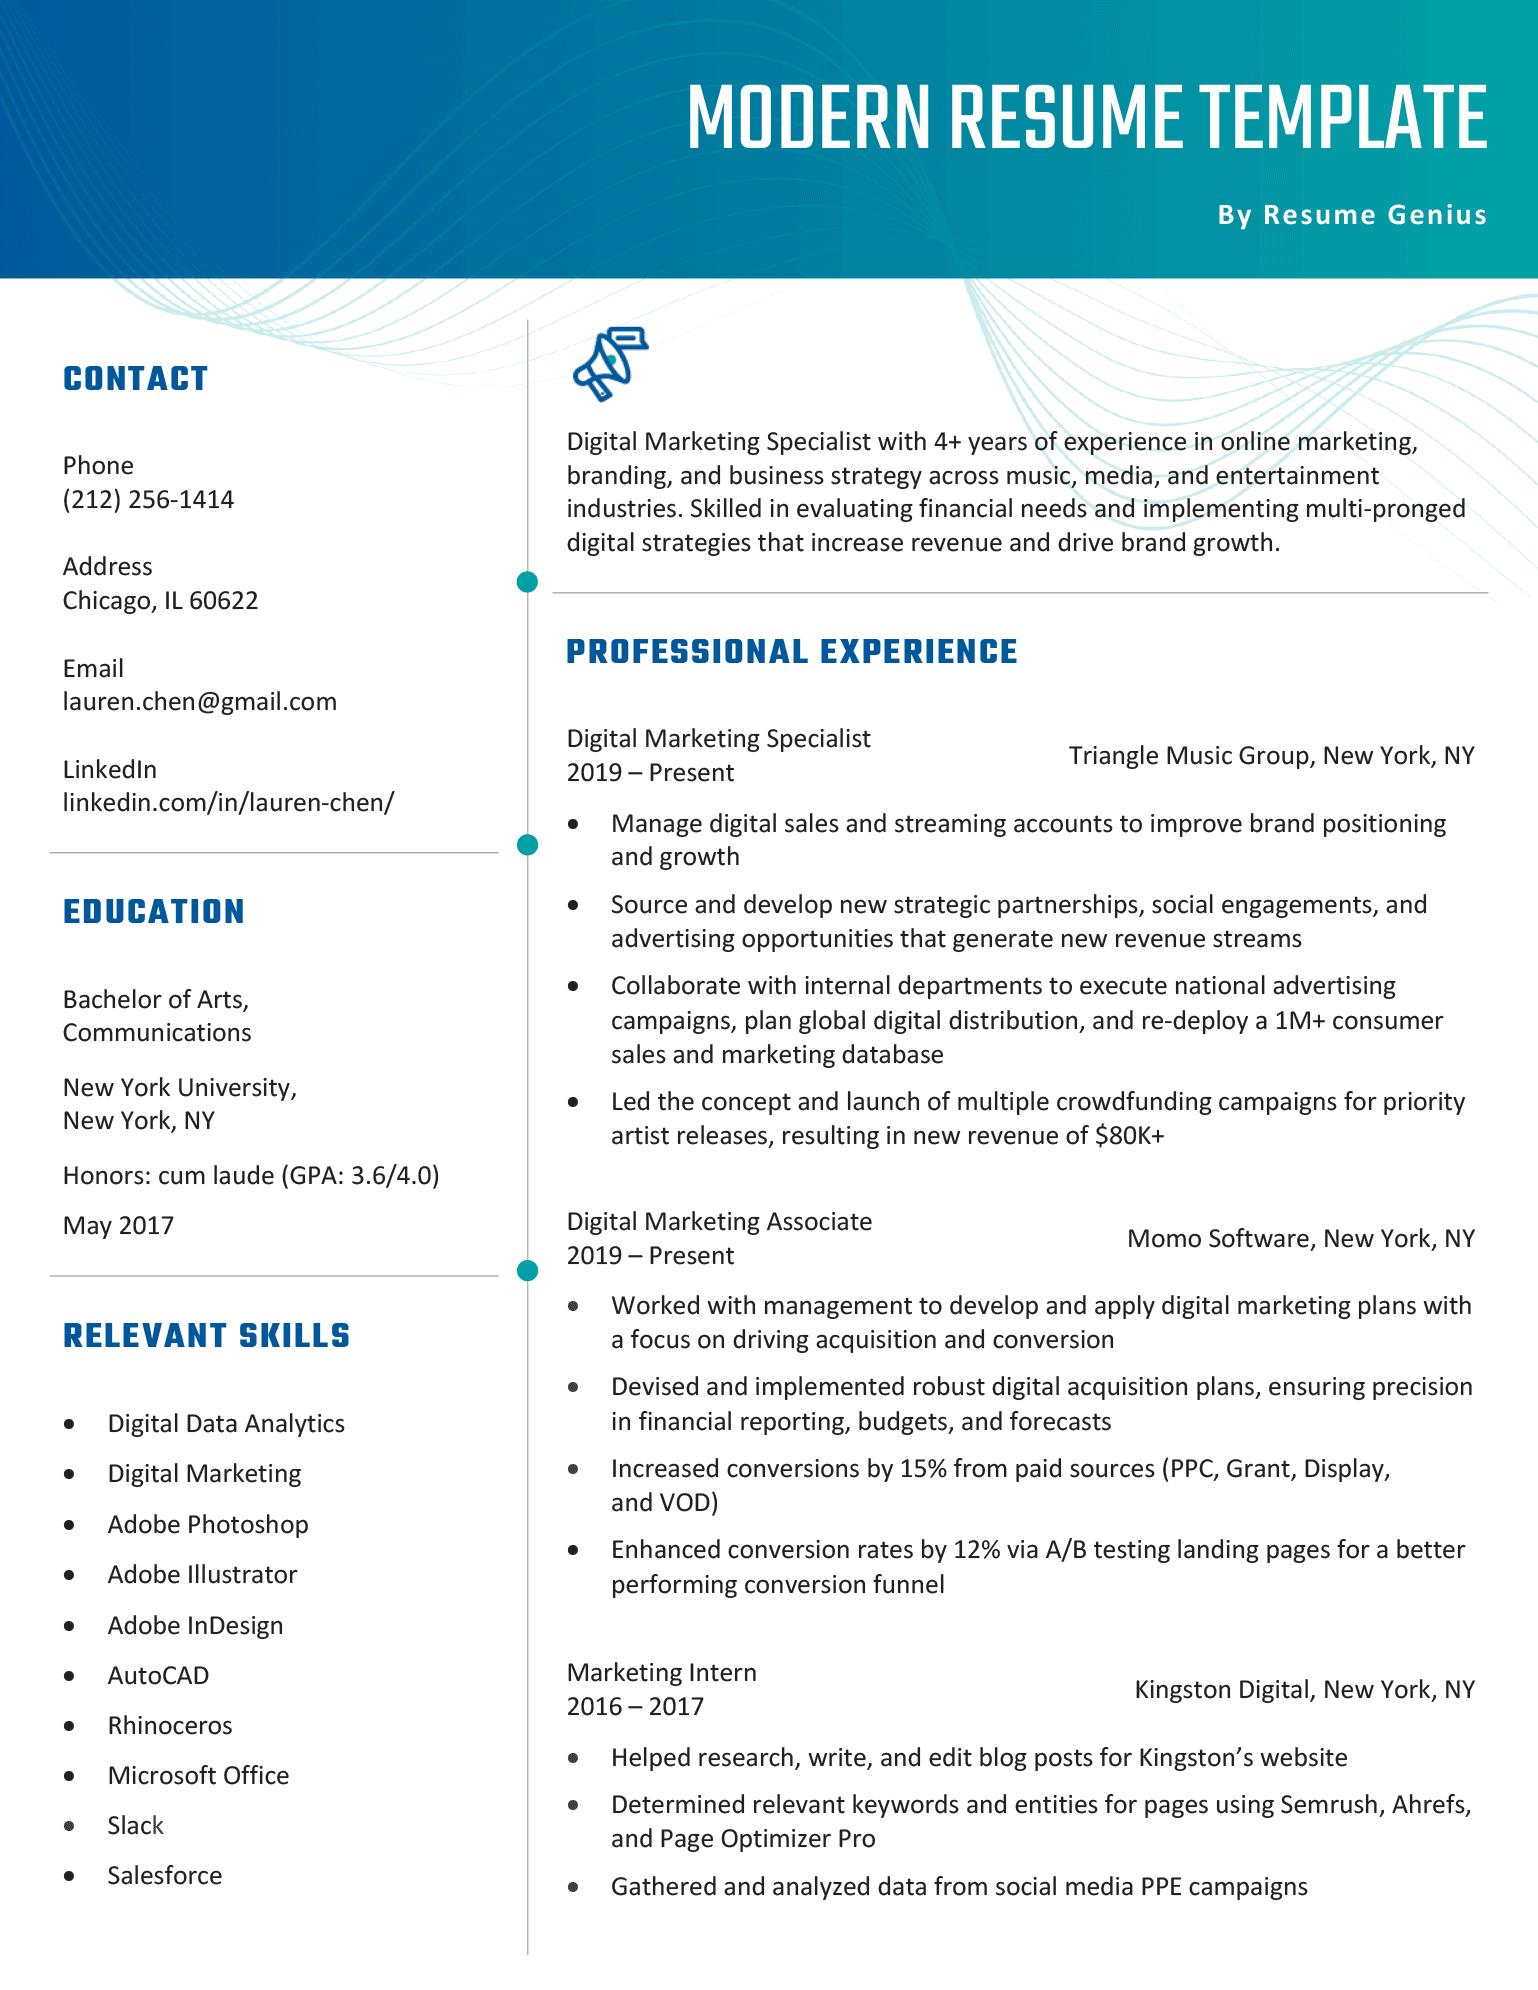 Modern resume template design featuring teal headers and some unique graphic elements.